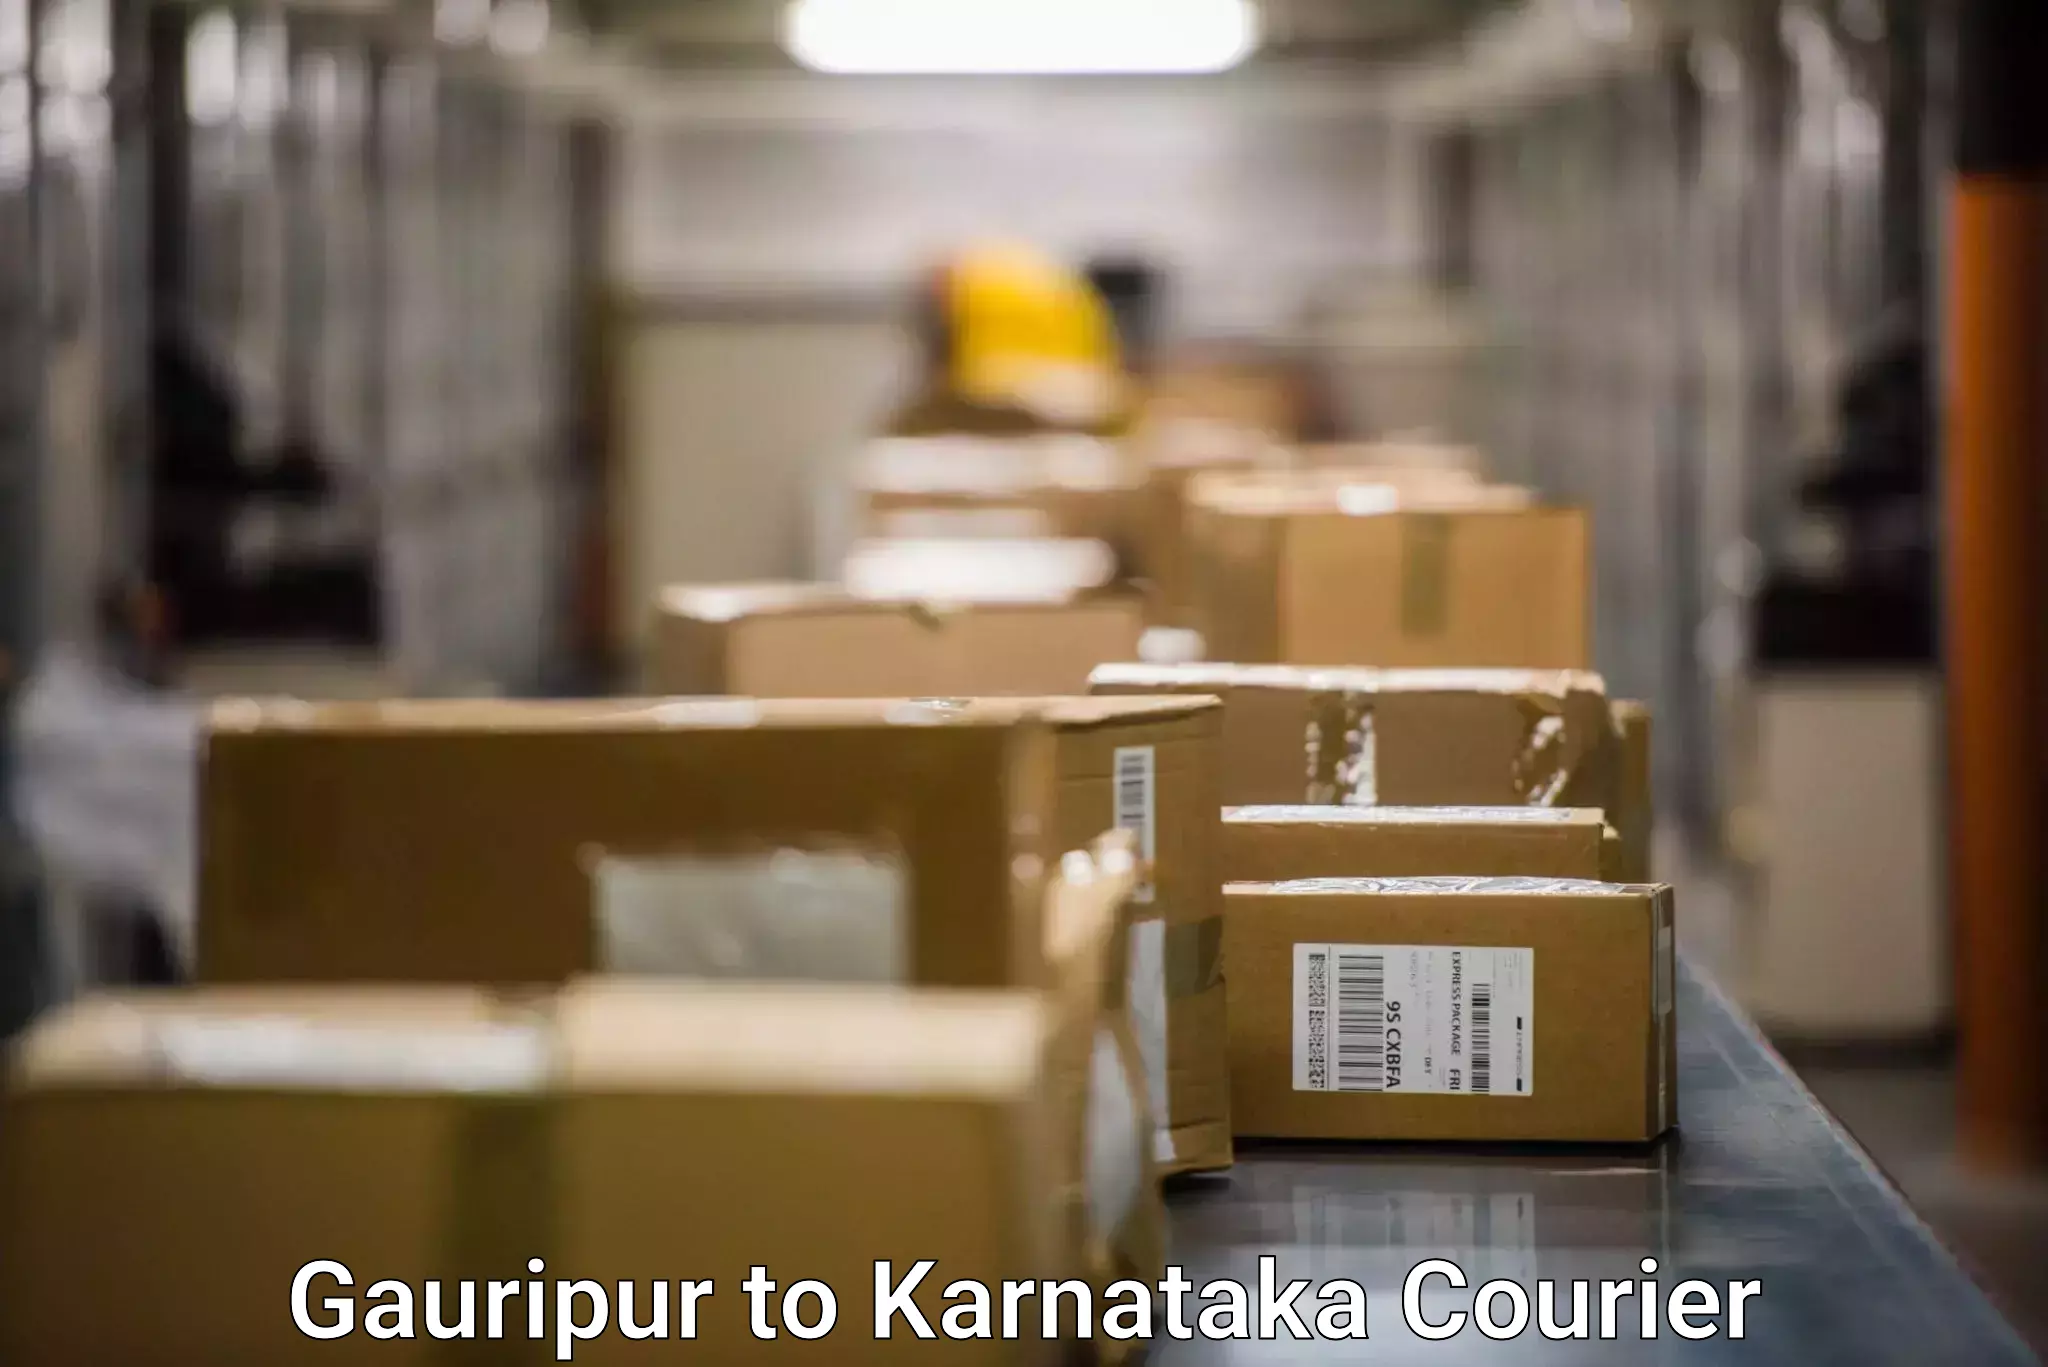 Overnight delivery services Gauripur to Karnataka